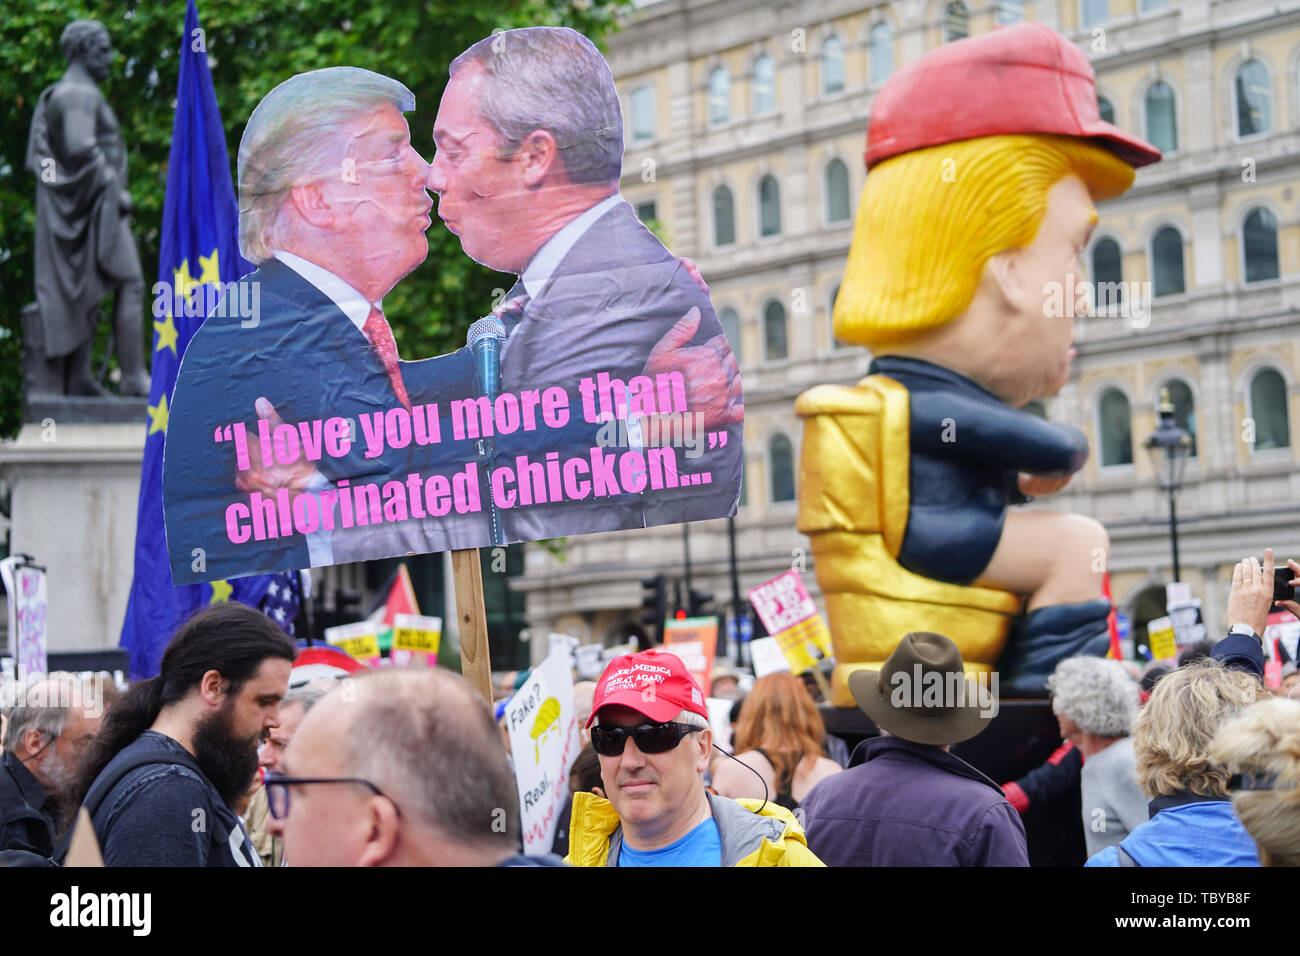 London, UK, 4 June, 2019. Protesters against the state visit of President Donald Trump to the UK in Trafalgar Square, London. Photo date: Tuesday, June 4, 2019. Photo: Roger Garfield/Alamy Live News Stock Photo